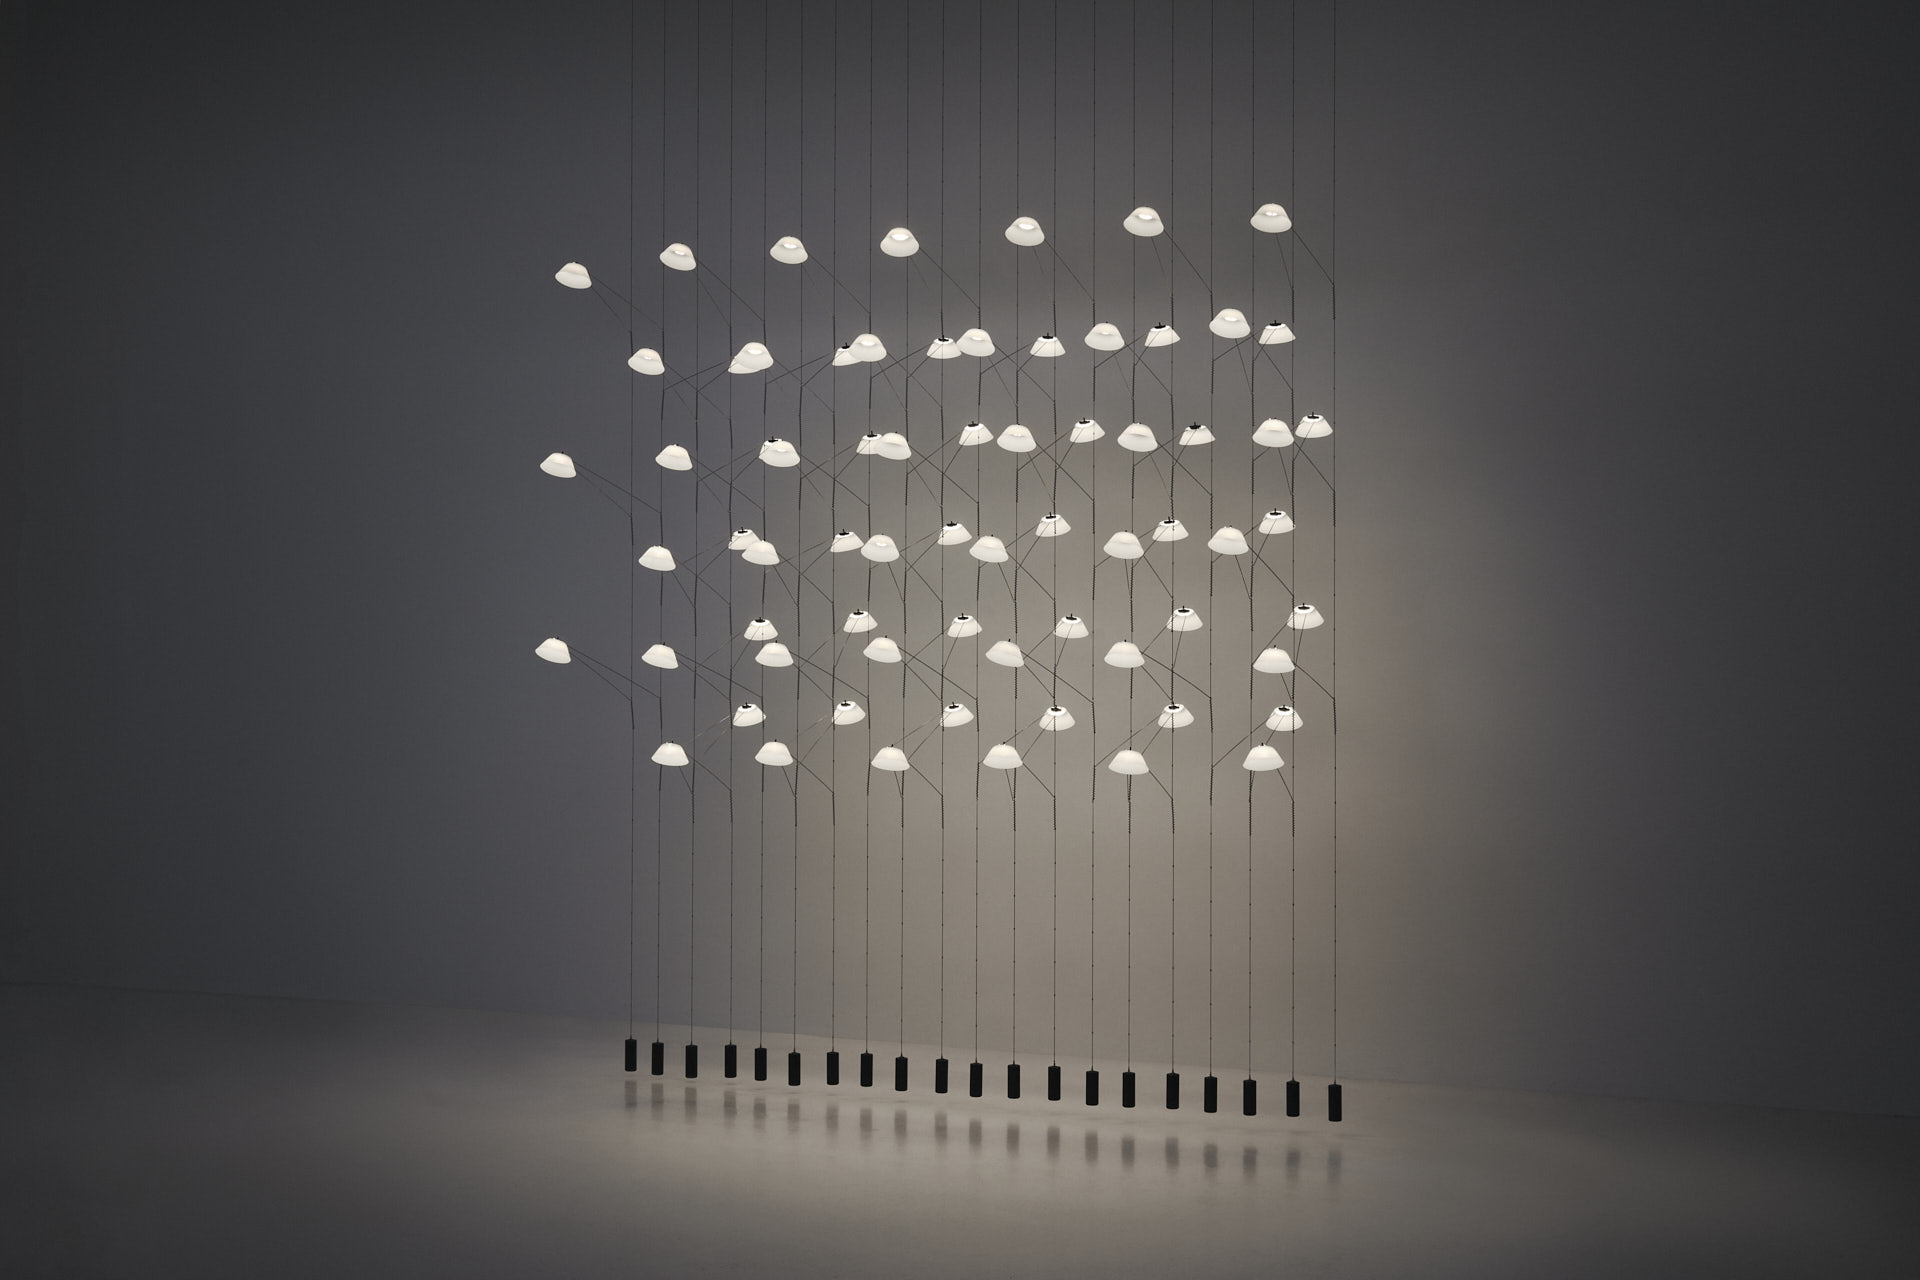 Liiu arranged in a wall like configuration, suspended from to ceiling reaching the floor.